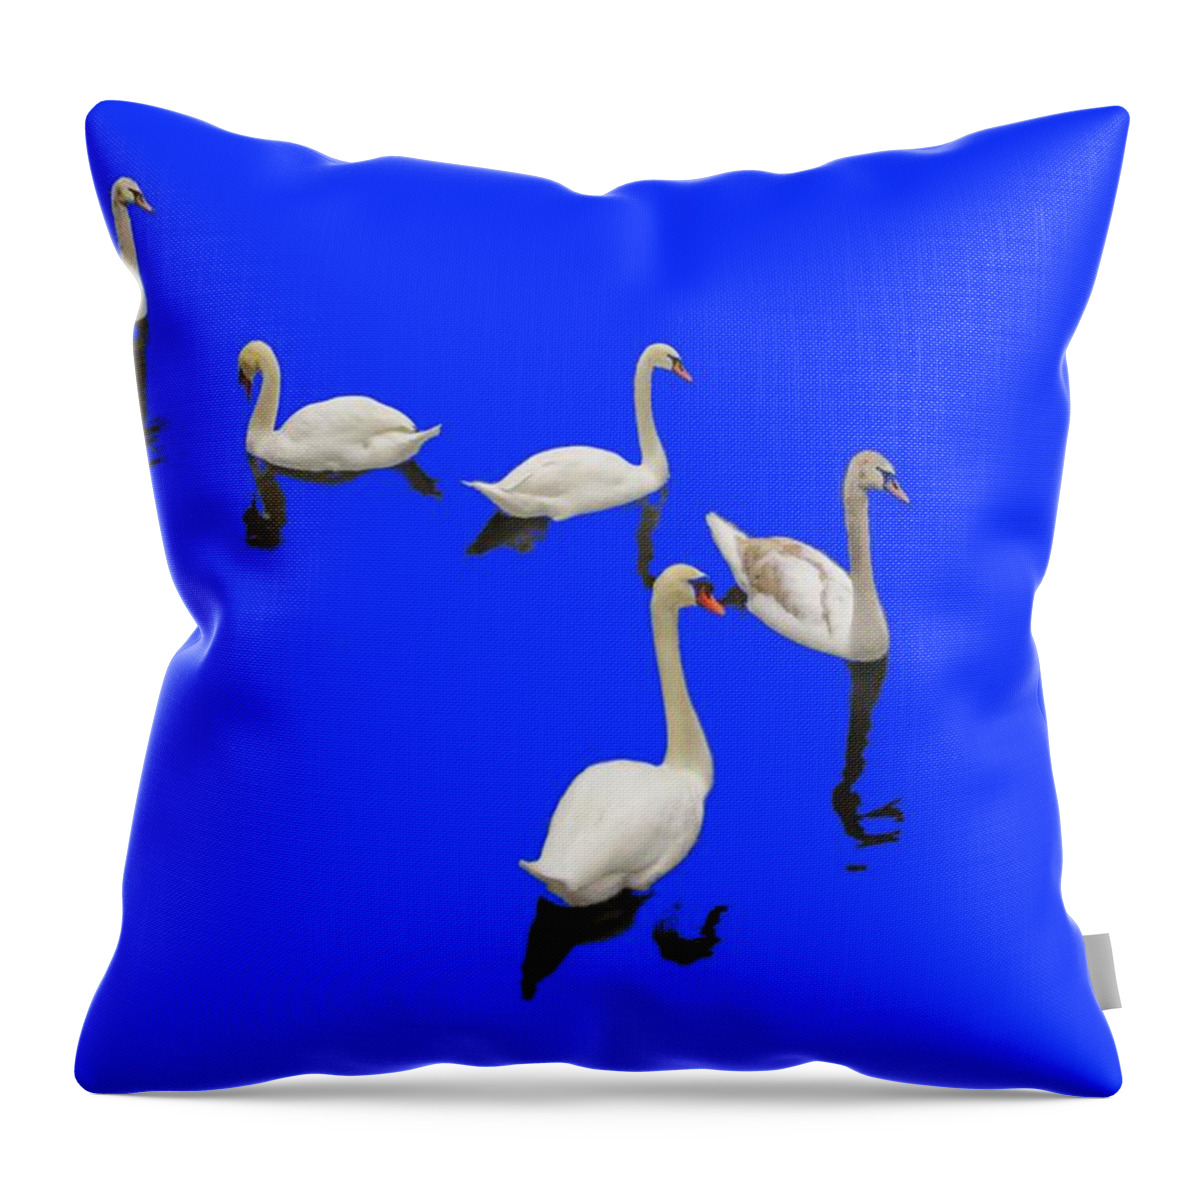 Background Blue Throw Pillow featuring the photograph Swan Family On Blue by Constantine Gregory